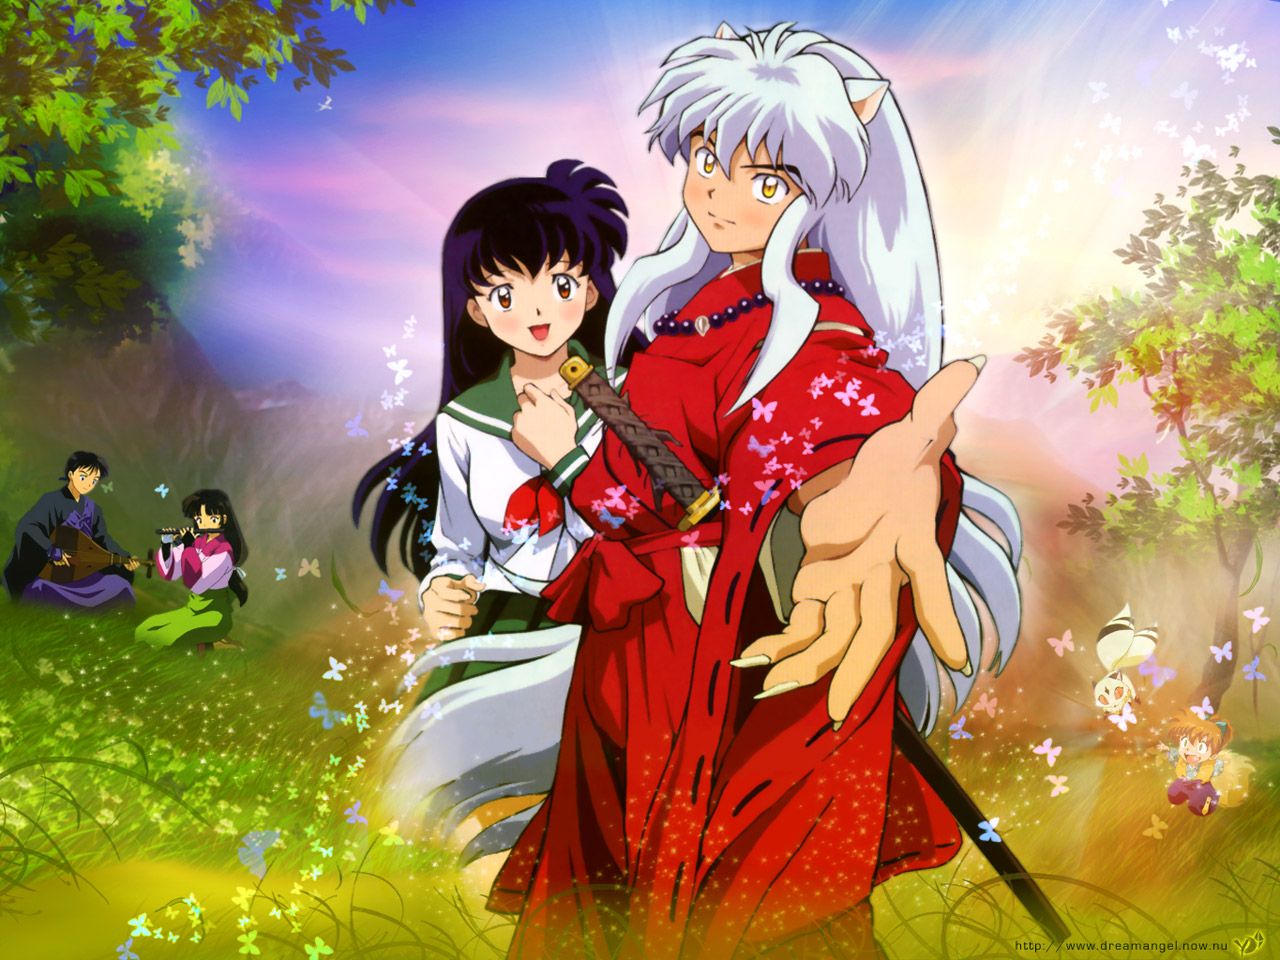 Inuyasha and Scan Gallery